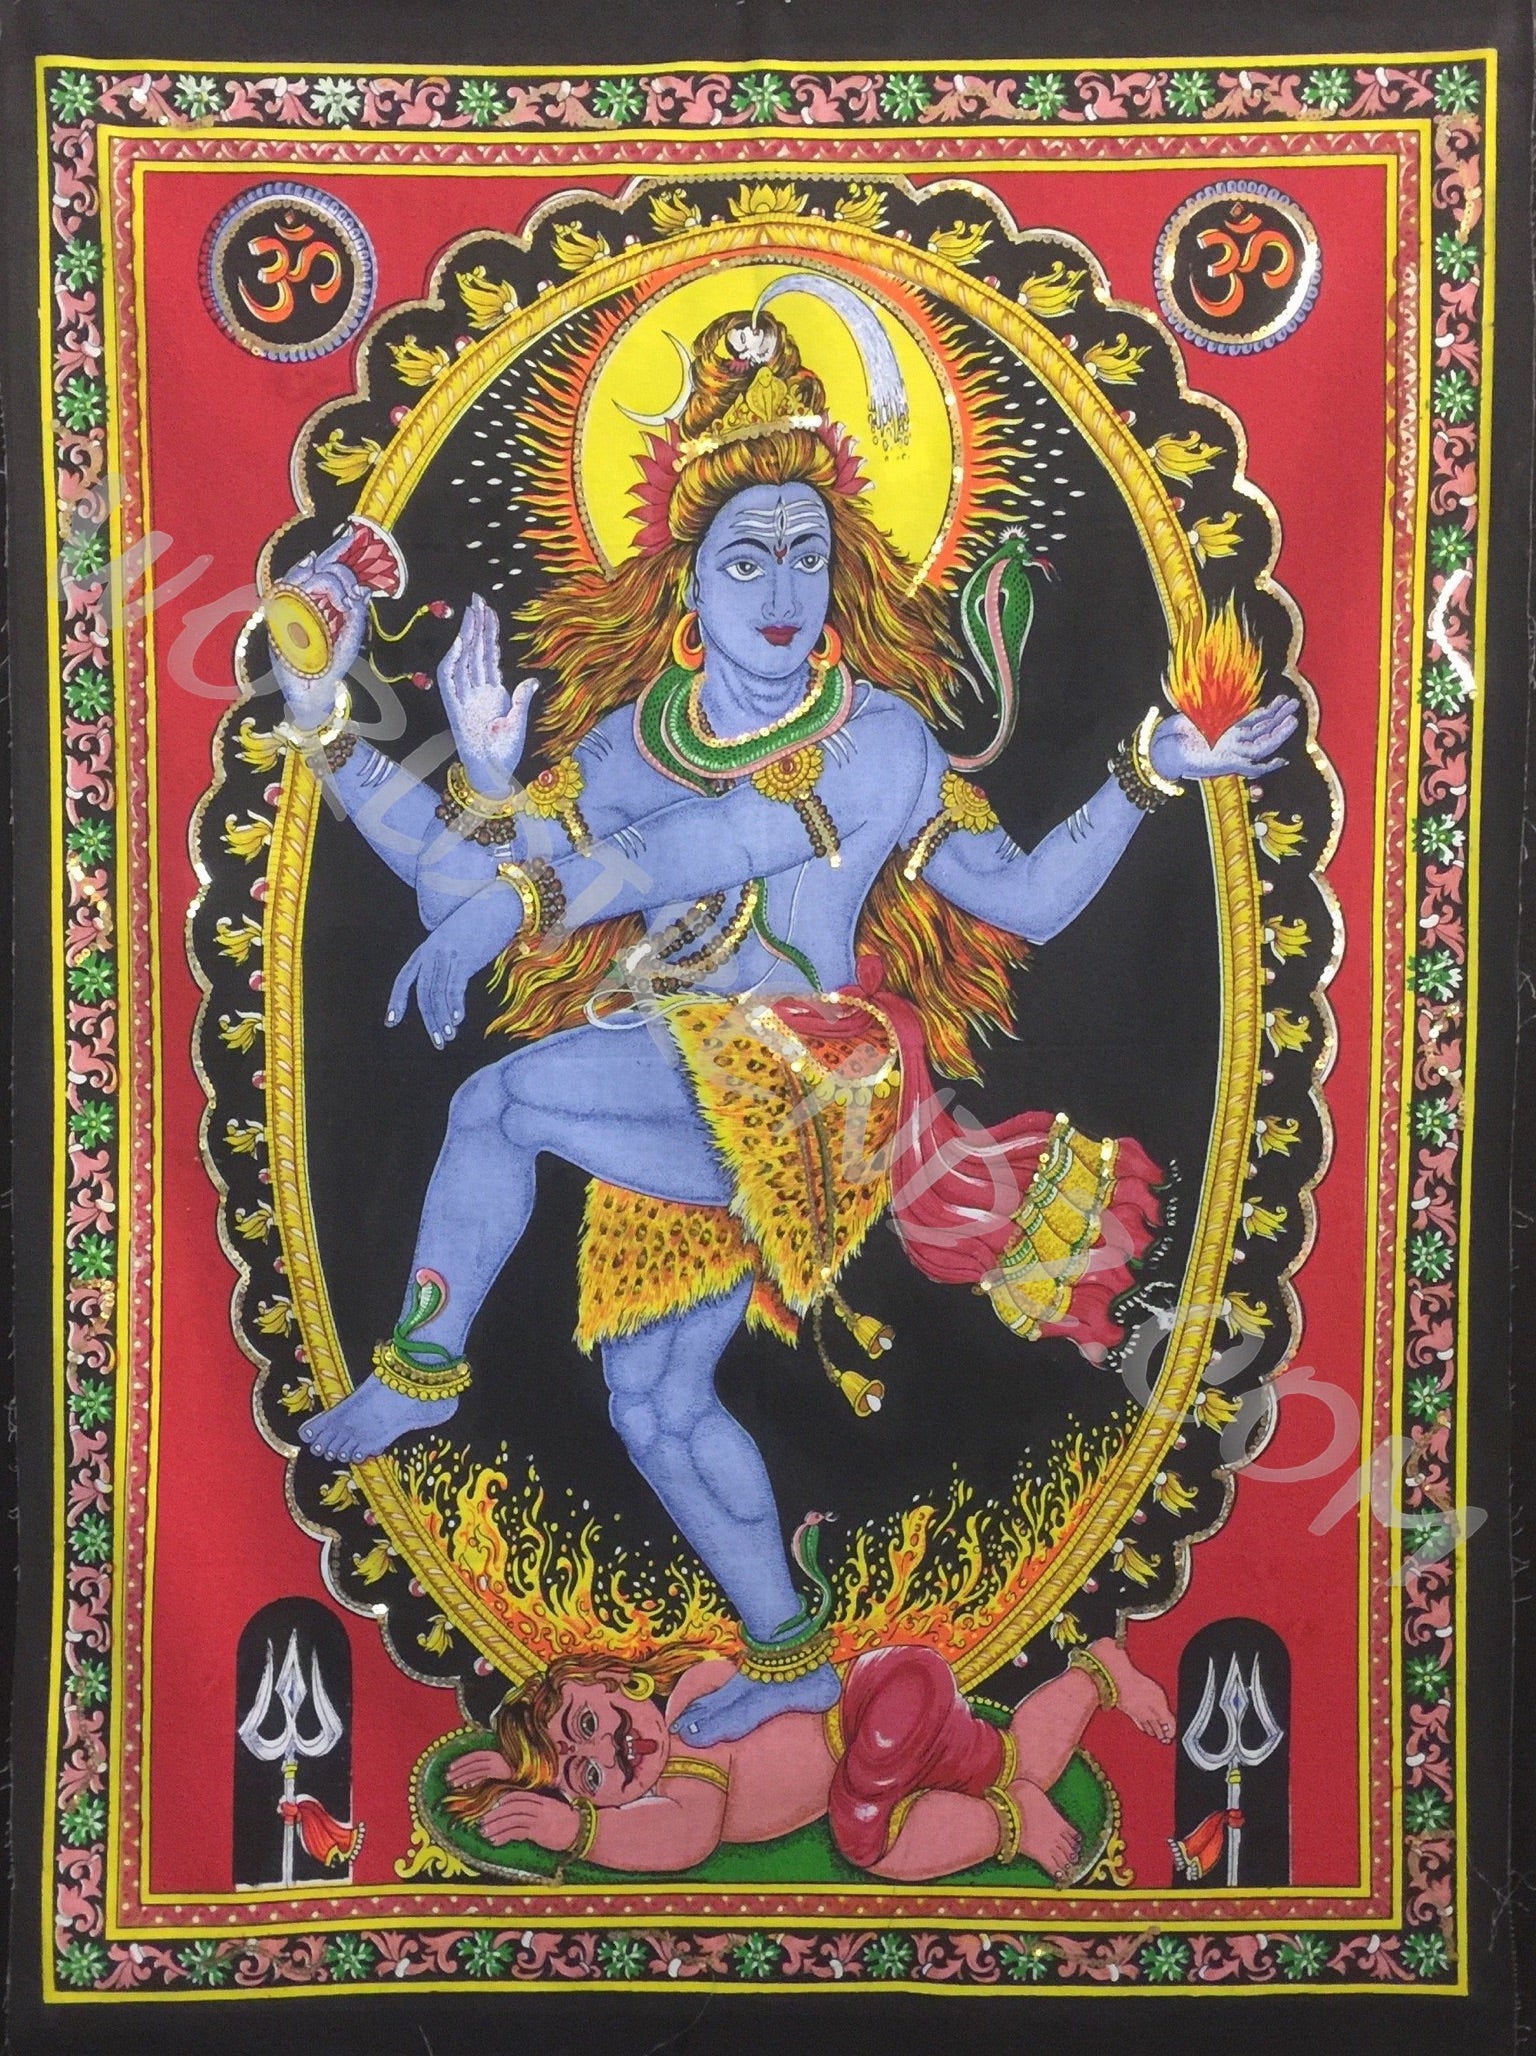 DEITY TAPESTRY SEQUINED SHIVA DANCING